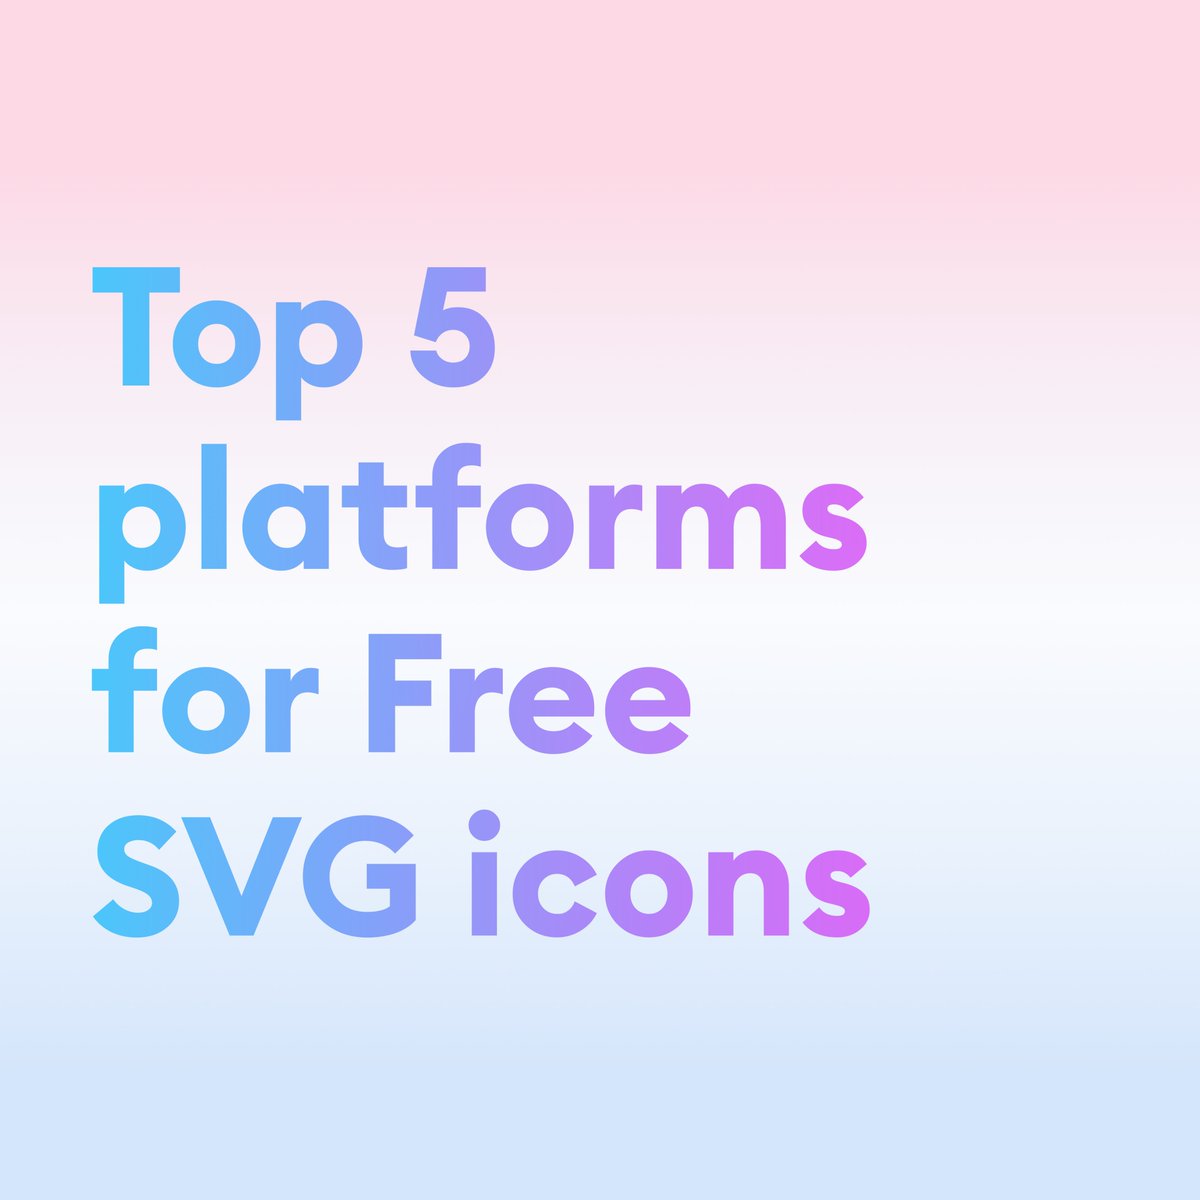 🌟 Hey, creative minds! If you're looking to spice up your designs with awesome SVG icons, look no further! Here are my top 5 go-to websites for high-quality, customizable icons 🎨
.
.
#svgicons #freeicons #svg #svgfiles #cycloto